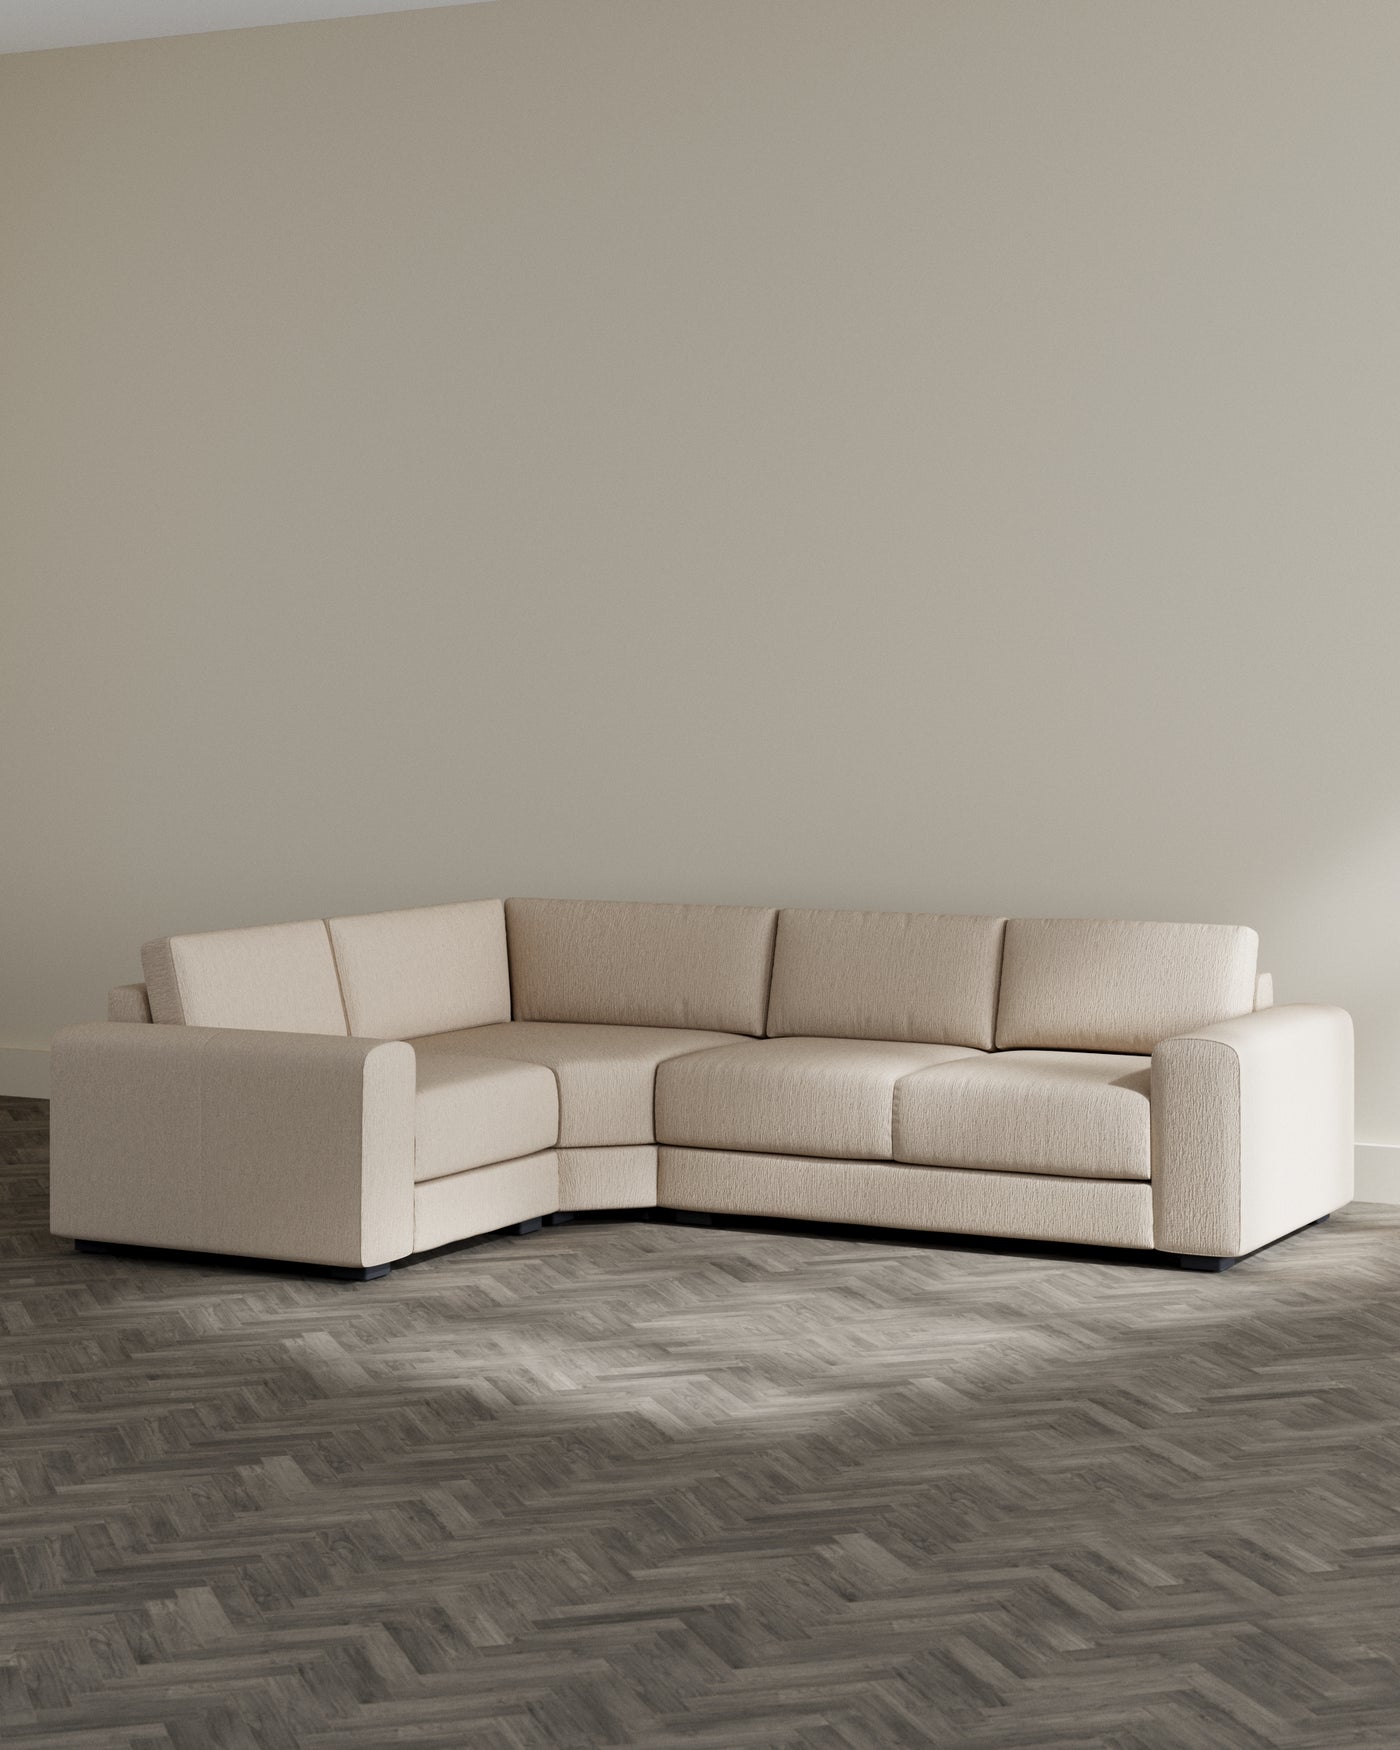 Beige contemporary L-shaped sectional sofa with a clean design and plush cushions, set on a grey herringbone-patterned floor.